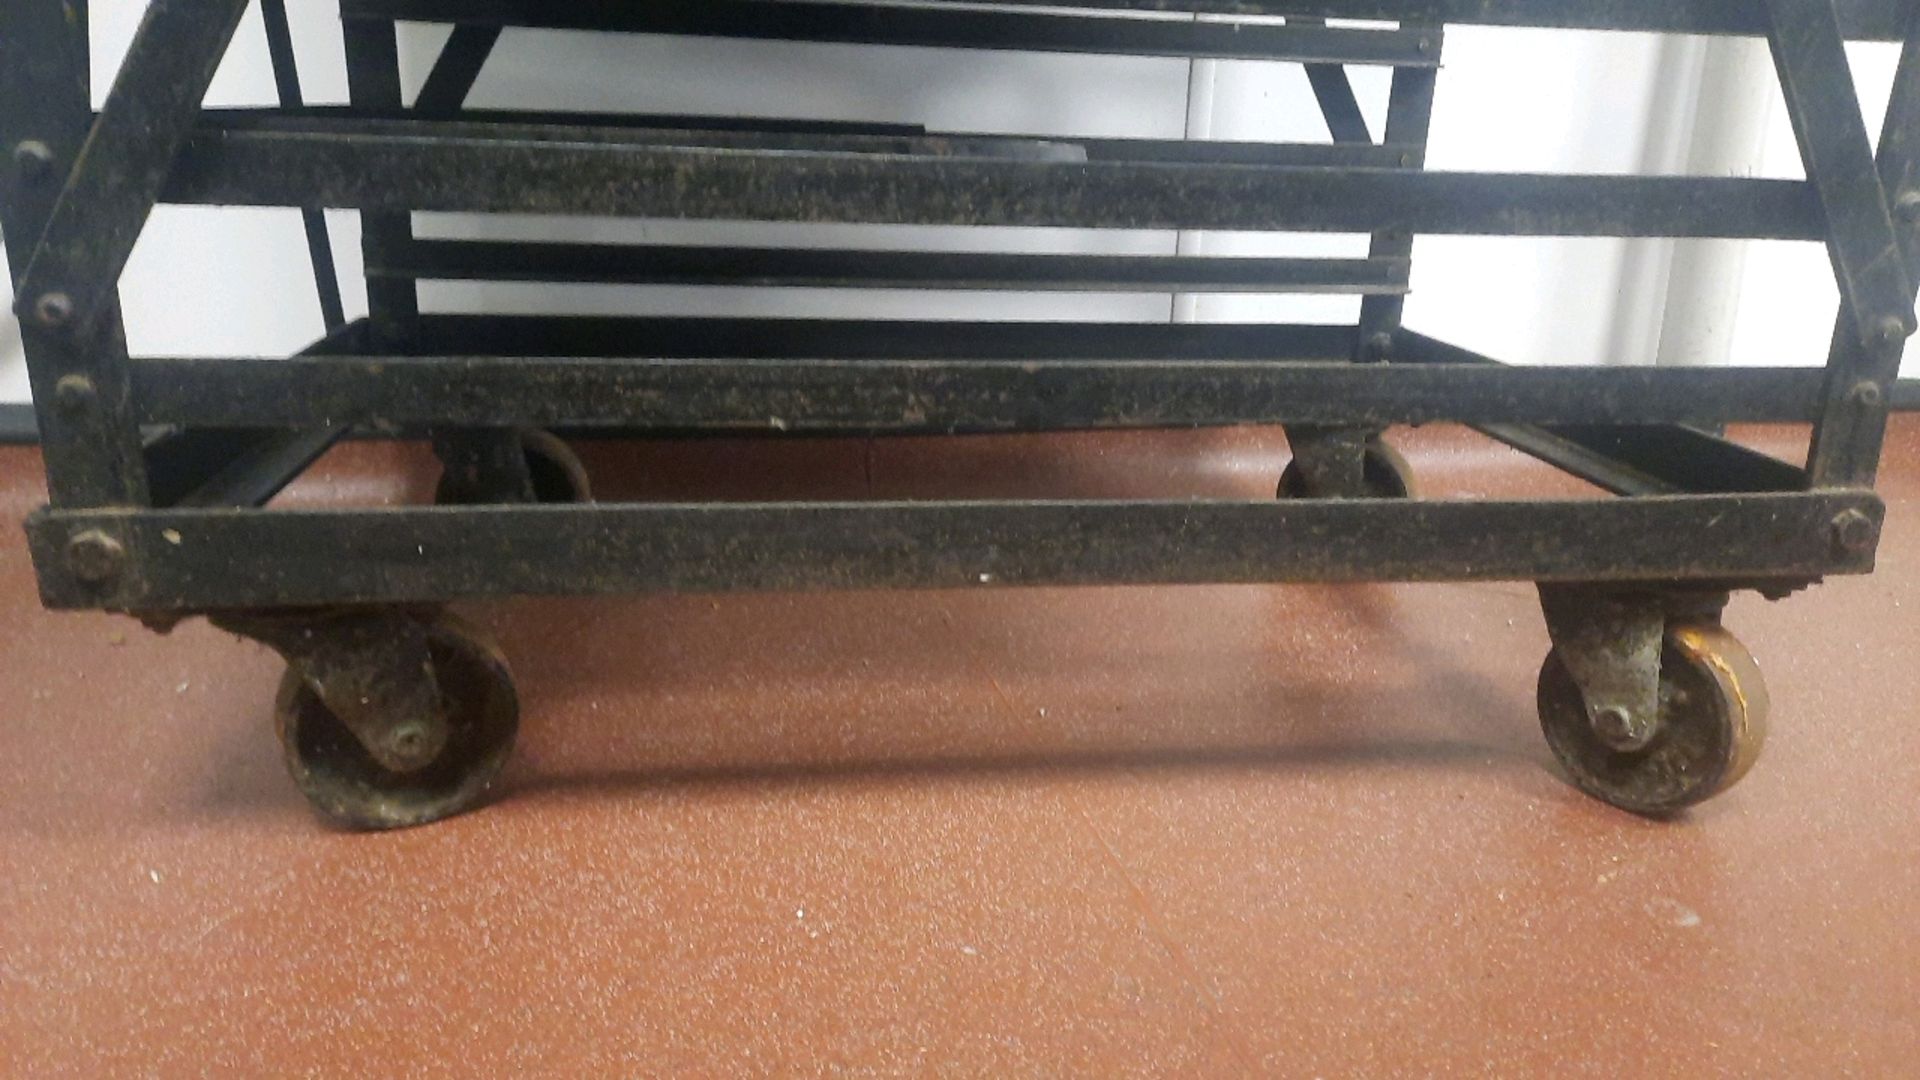 Bakery Tray Rack Trolley - Image 4 of 4